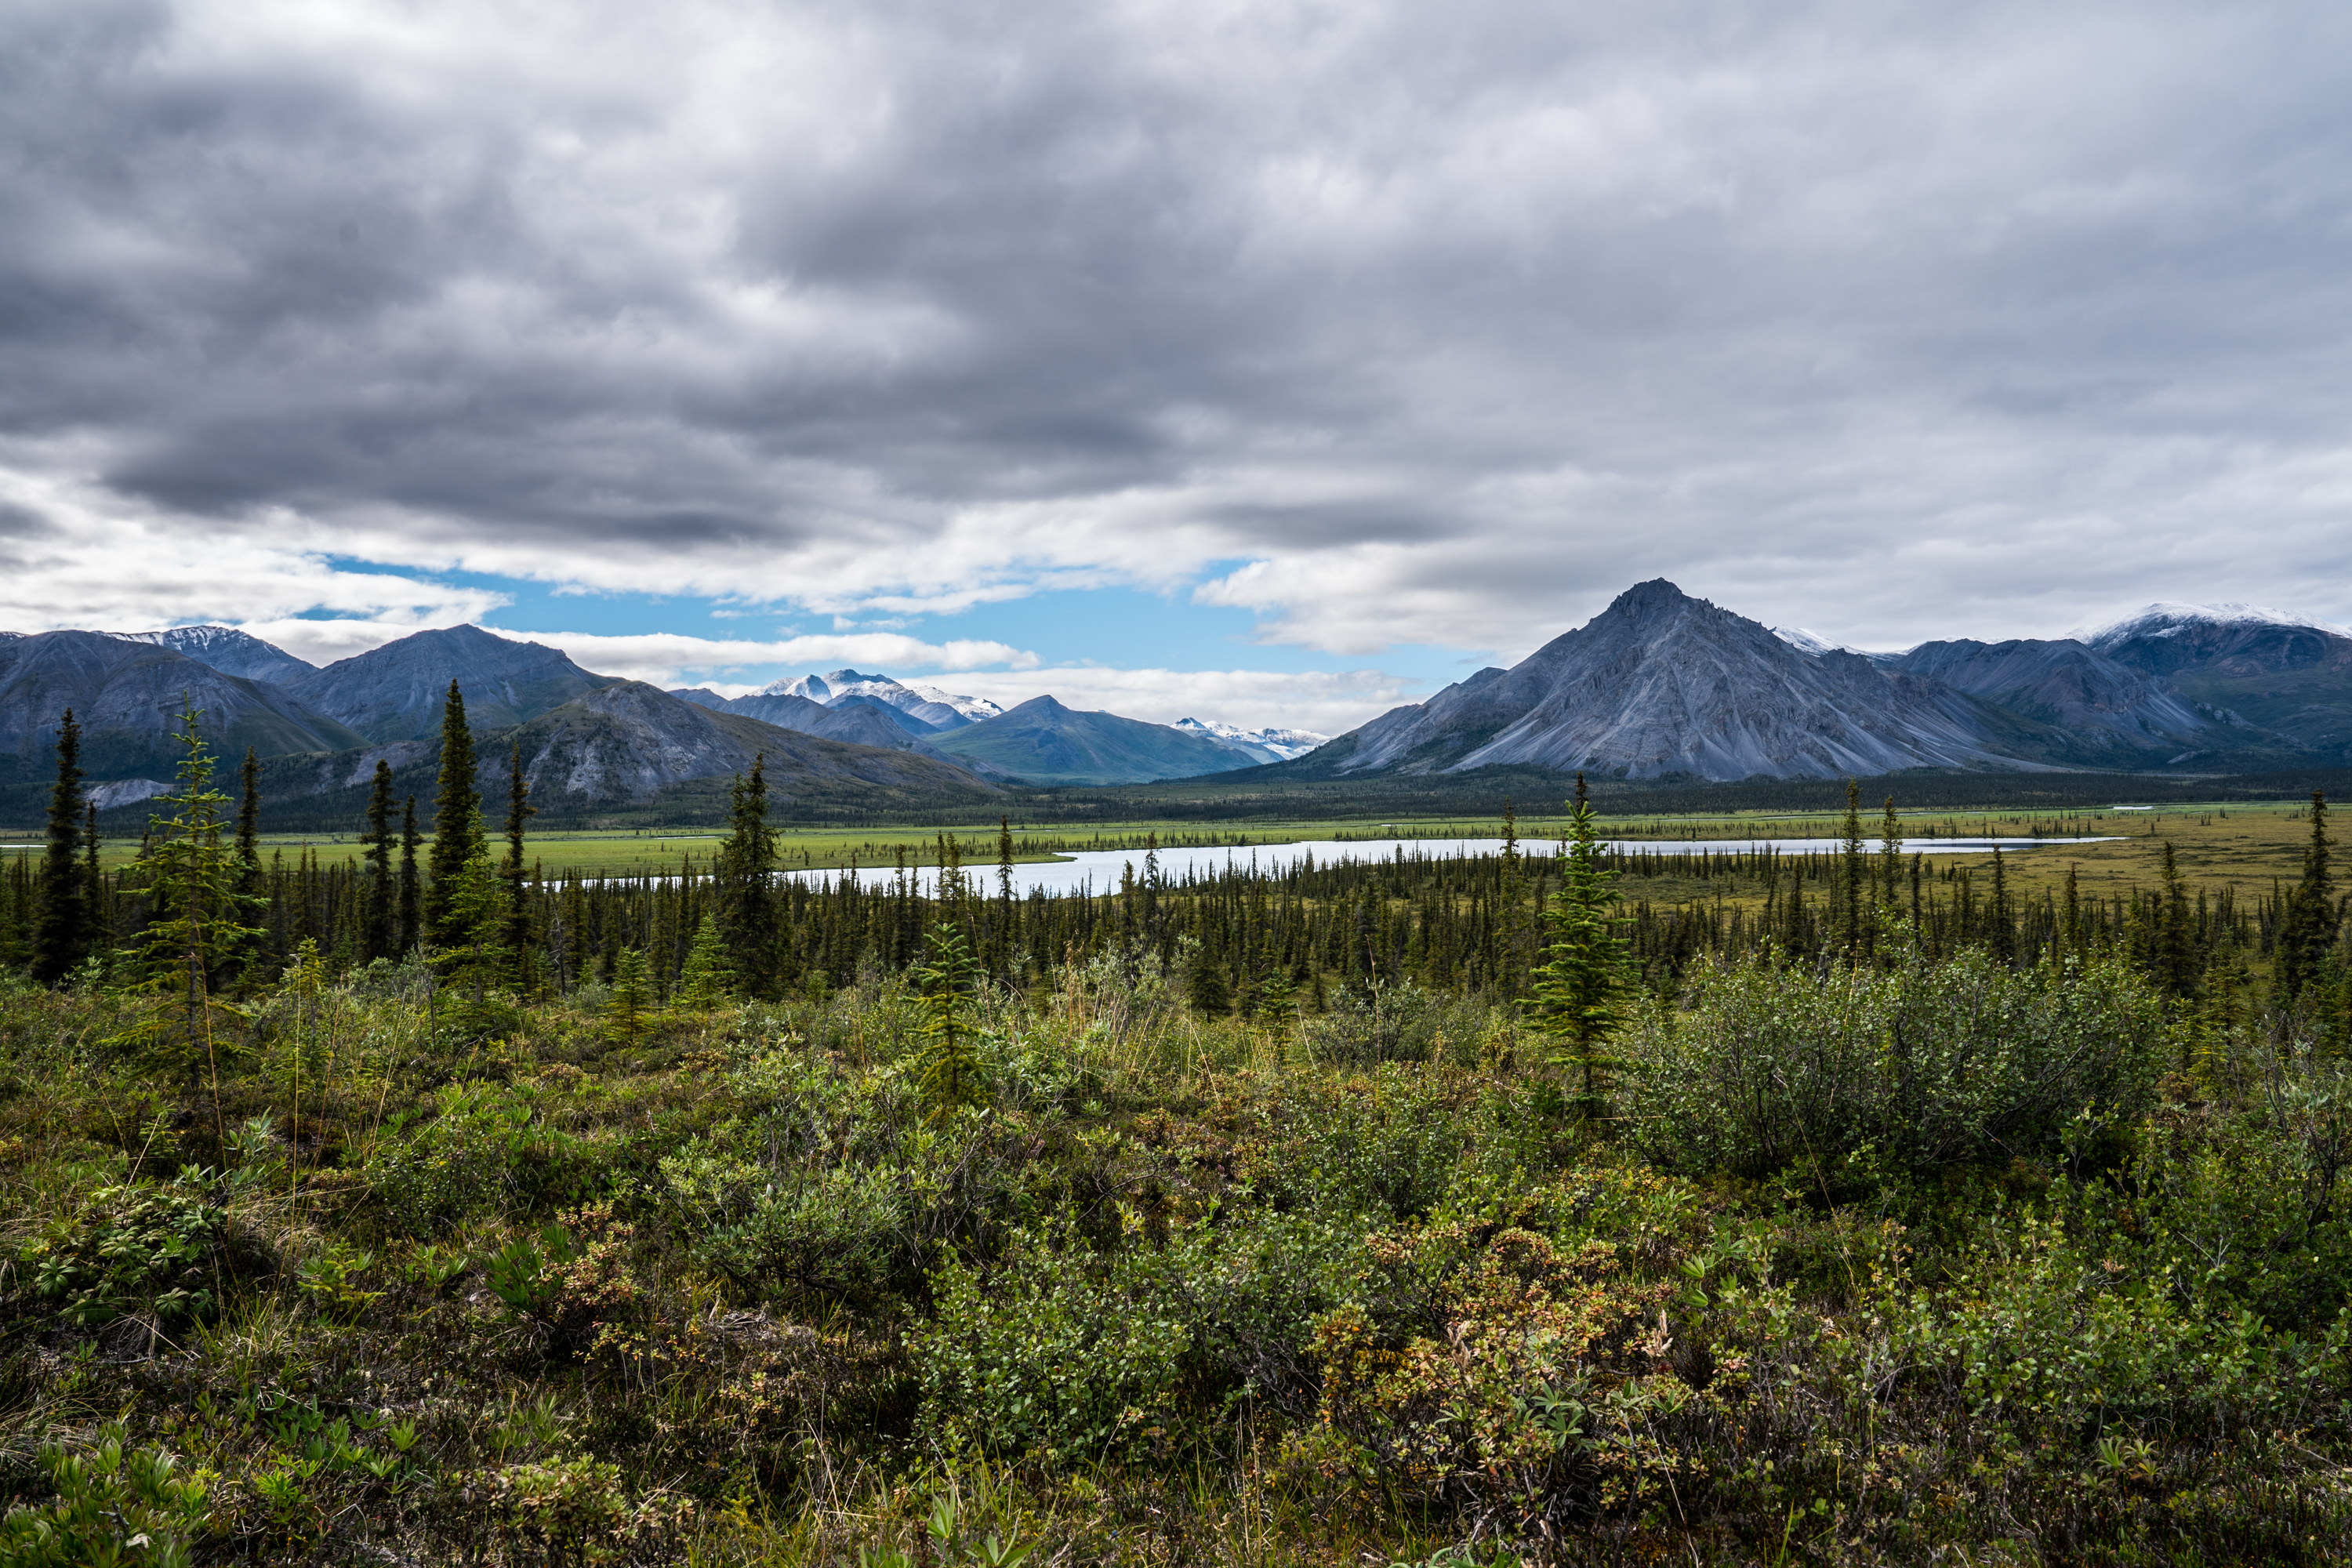 Green tundra and spruce trees with mountains in the distance